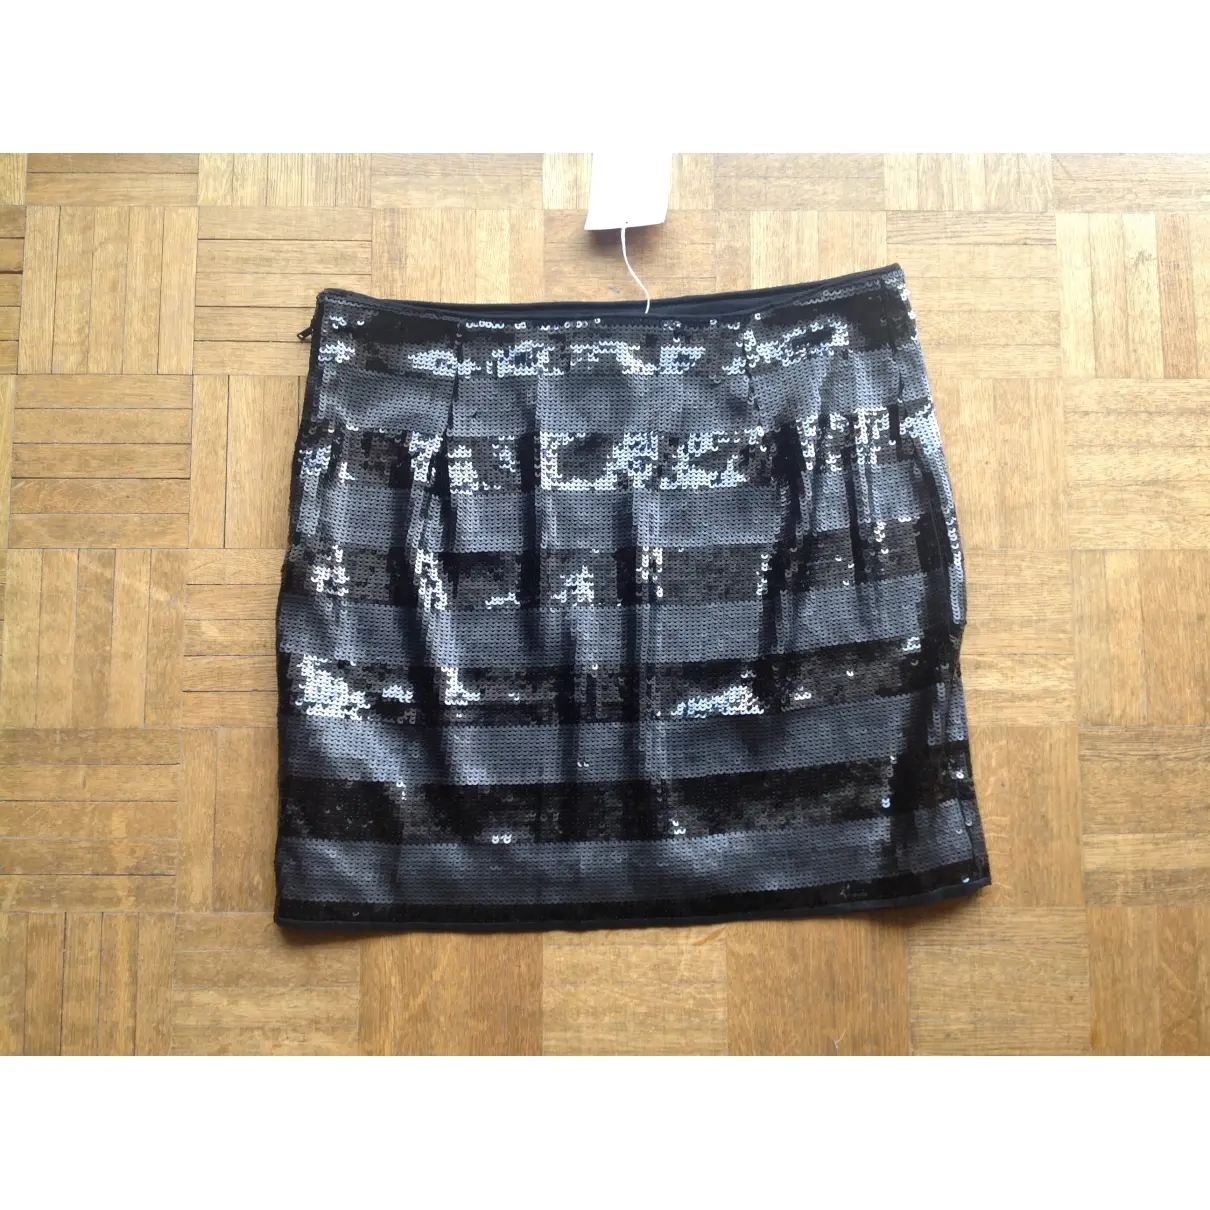 & Other Stories Mini skirt for sale